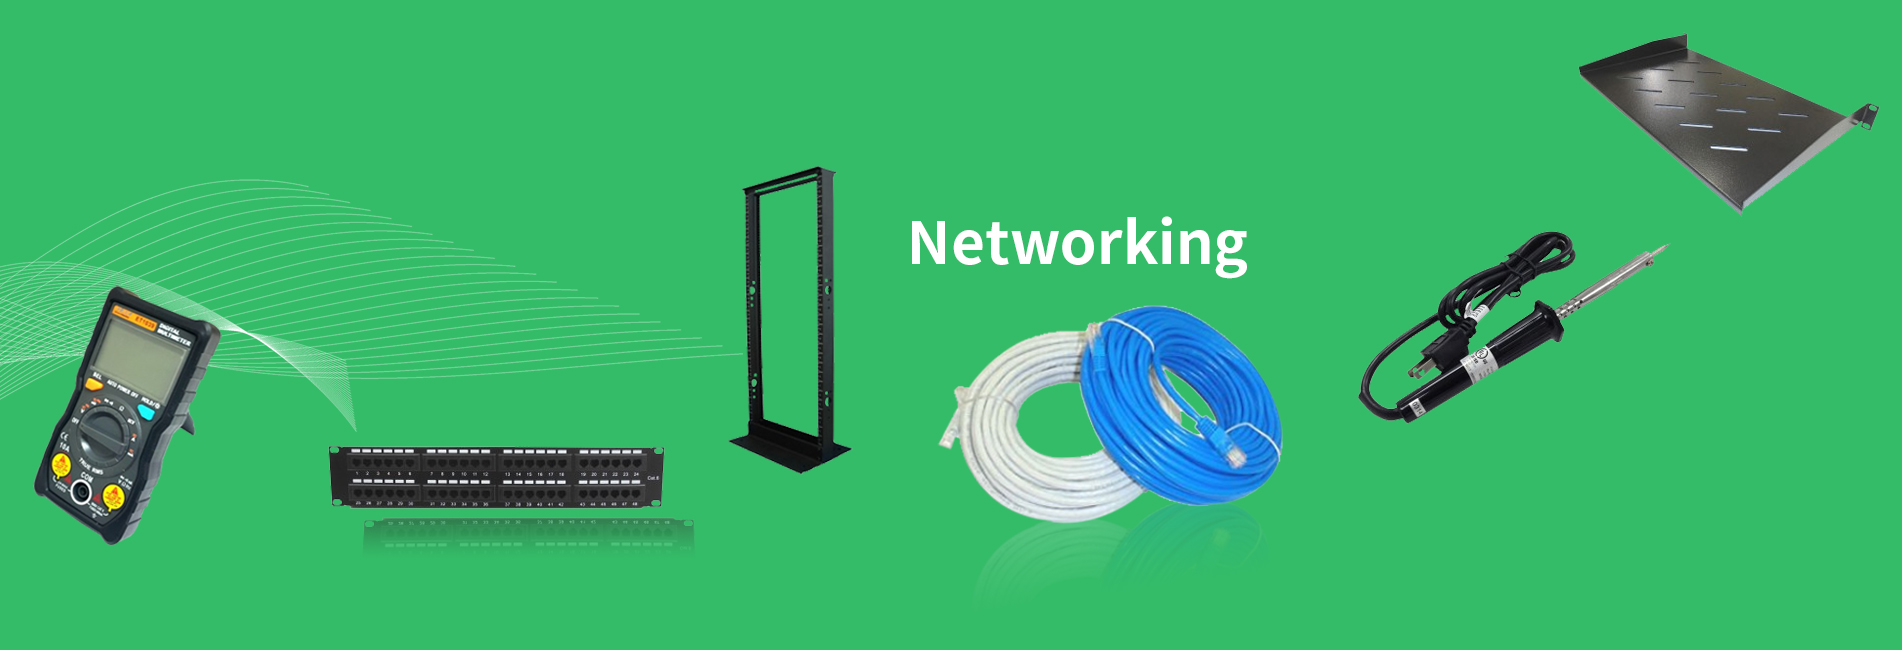 Networking banner_1